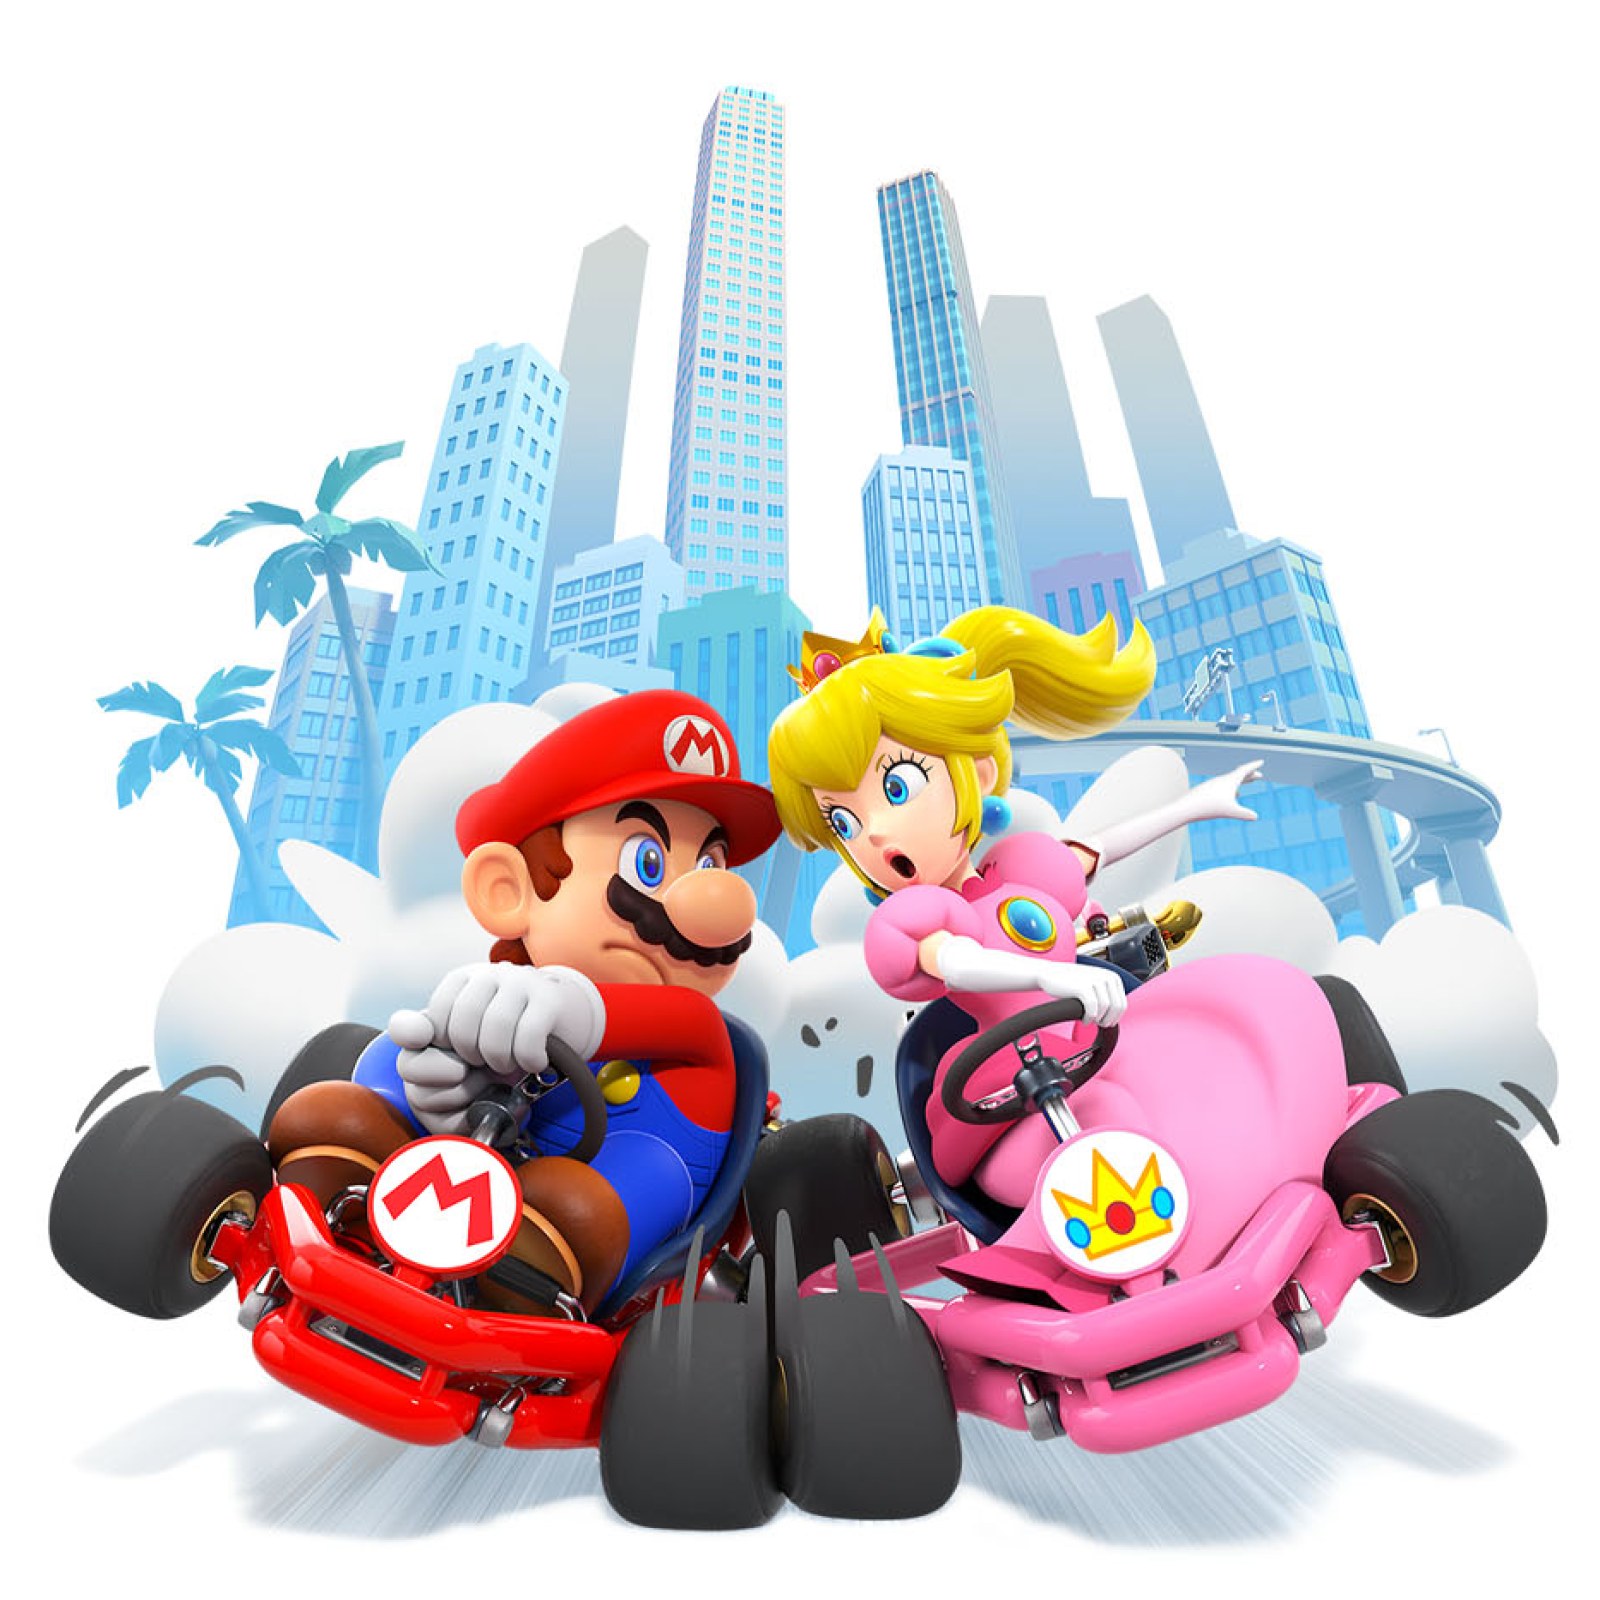 Mario Kart Tour is out now on Android